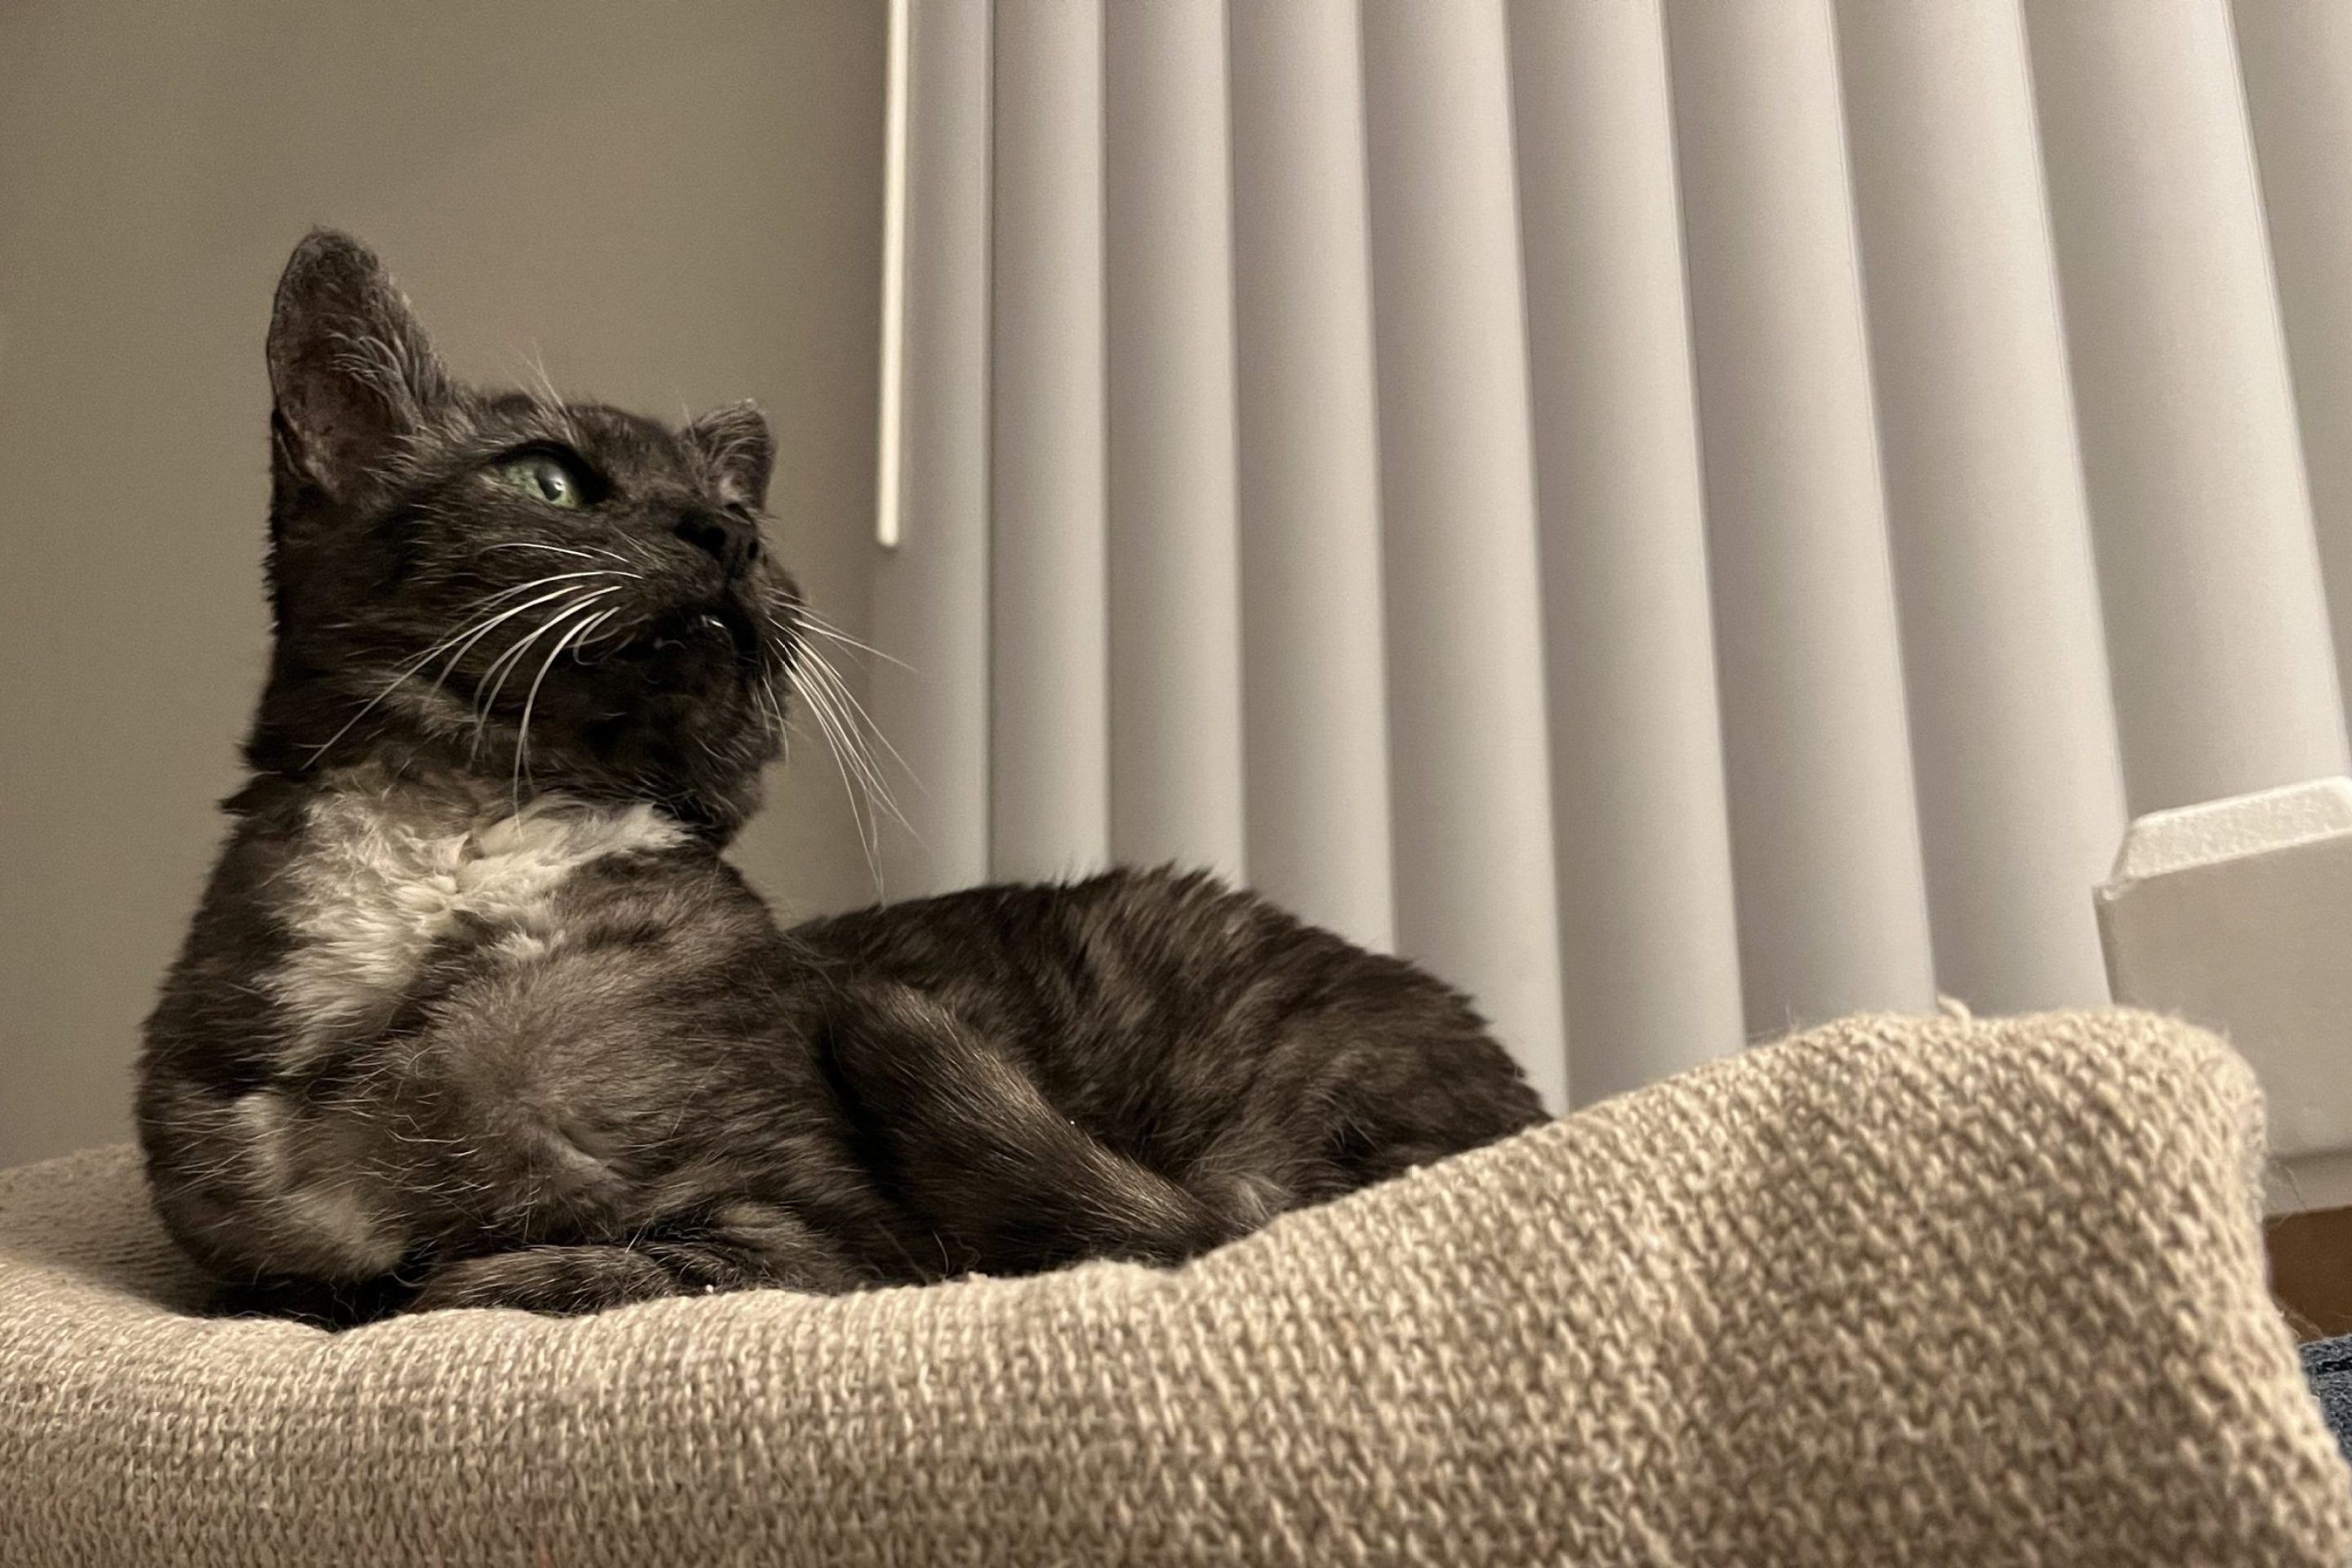 A photo of Lilly the cat. She's smokey with black and white coloring, a little white bib, and green eyes. She's sitting atop a blanket atop our couch looking quite regal.